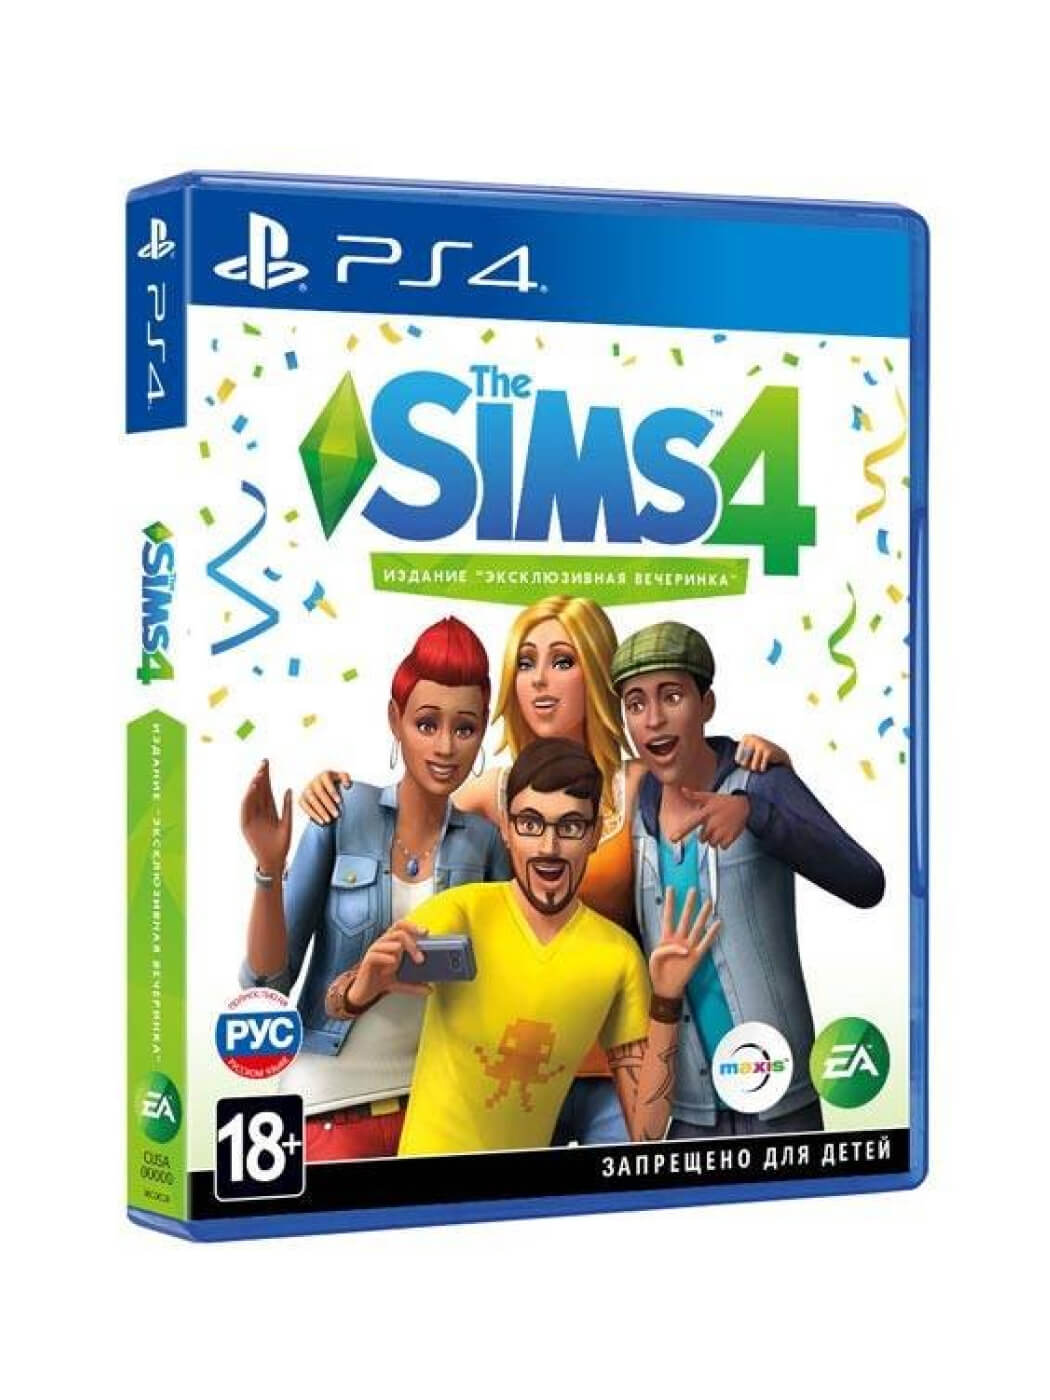 Диски игры симс. SIMS 4 ps4. SIMS 4 ps4 диск. Симс 4 на ПС 4. Симс 4 диск на ПС 4.